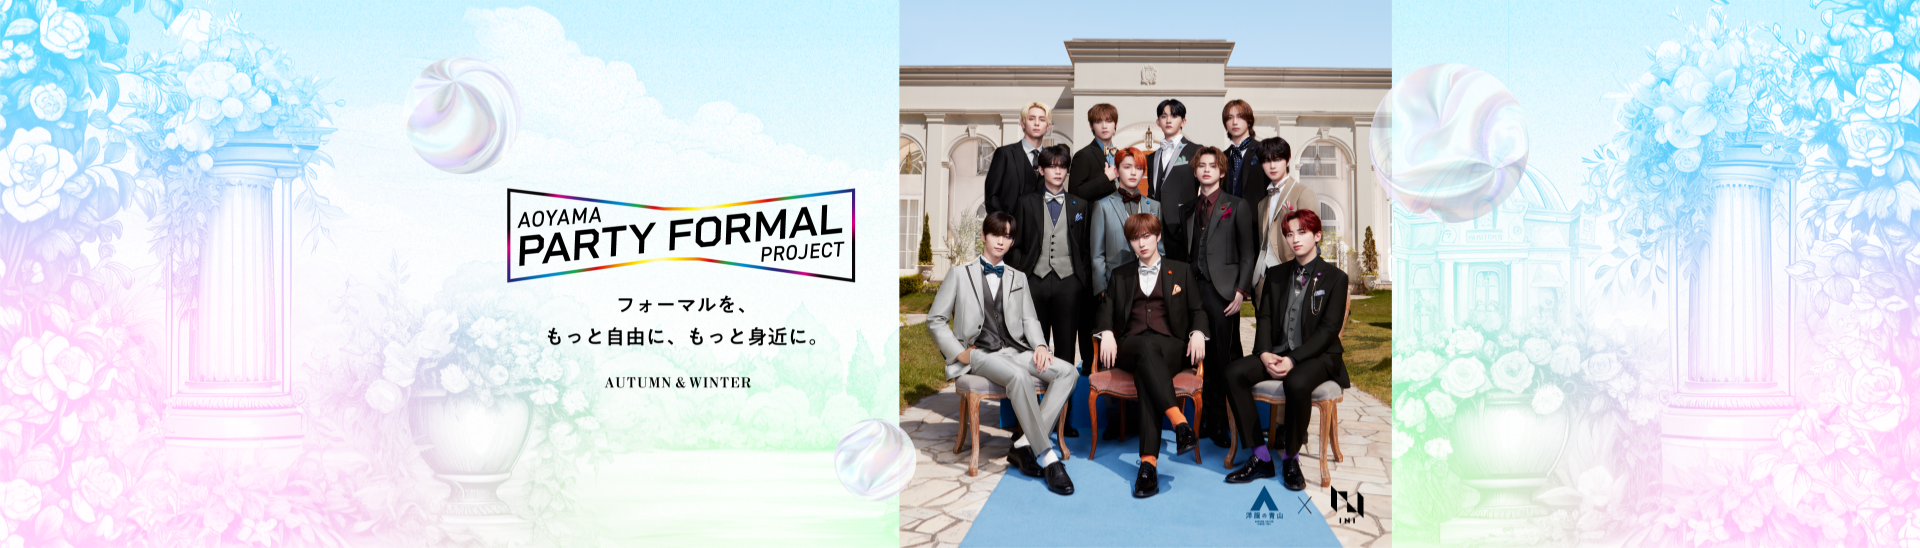 AOYAMA PARTY FORMAL PROJECT